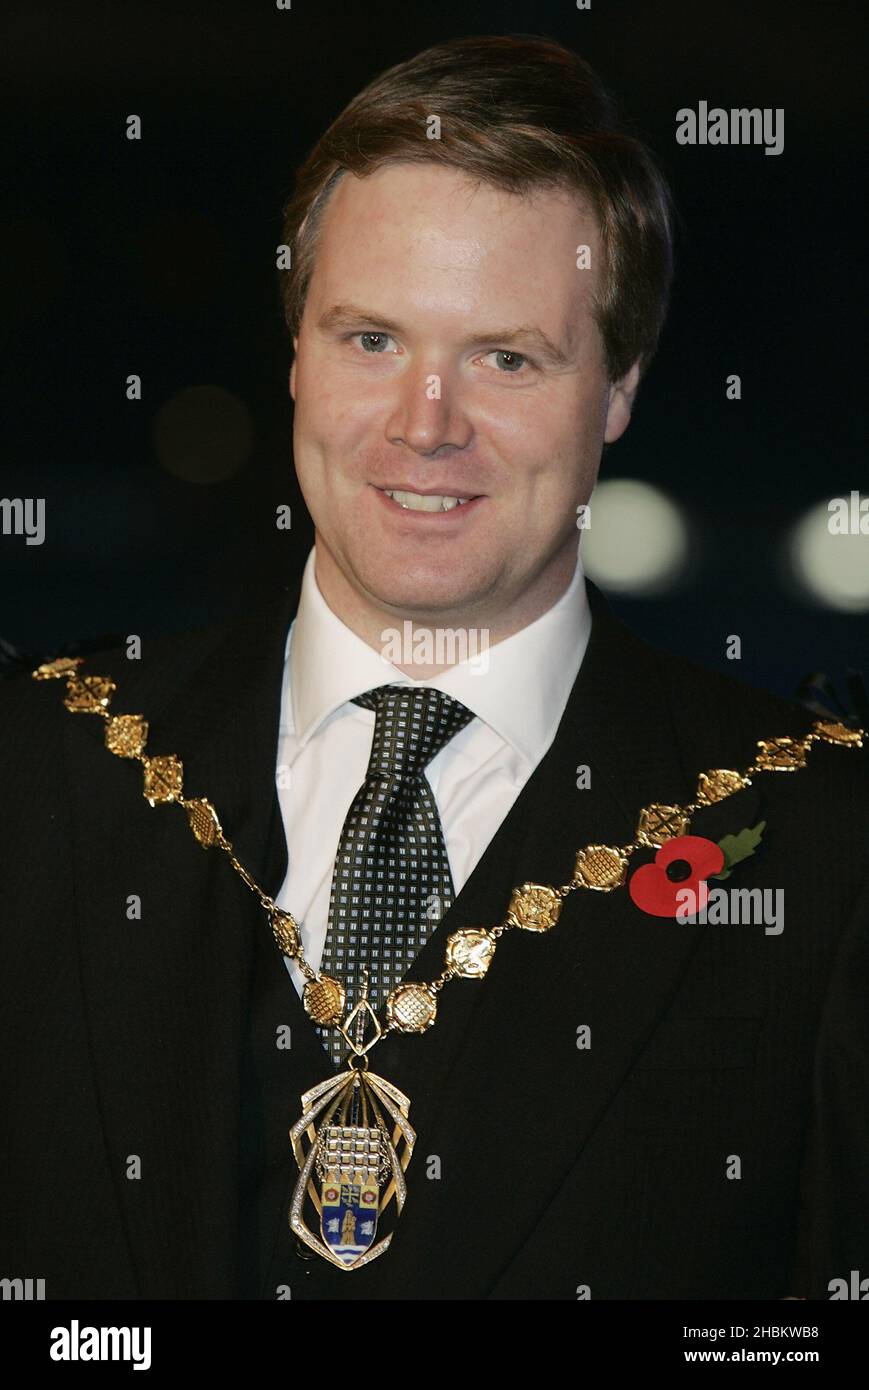 Lord Mayor of Westminster and Councillor, Duncan Sandys arrives at the 'A Christmas Carol' premiere in Leicester Square, London. Stock Photo